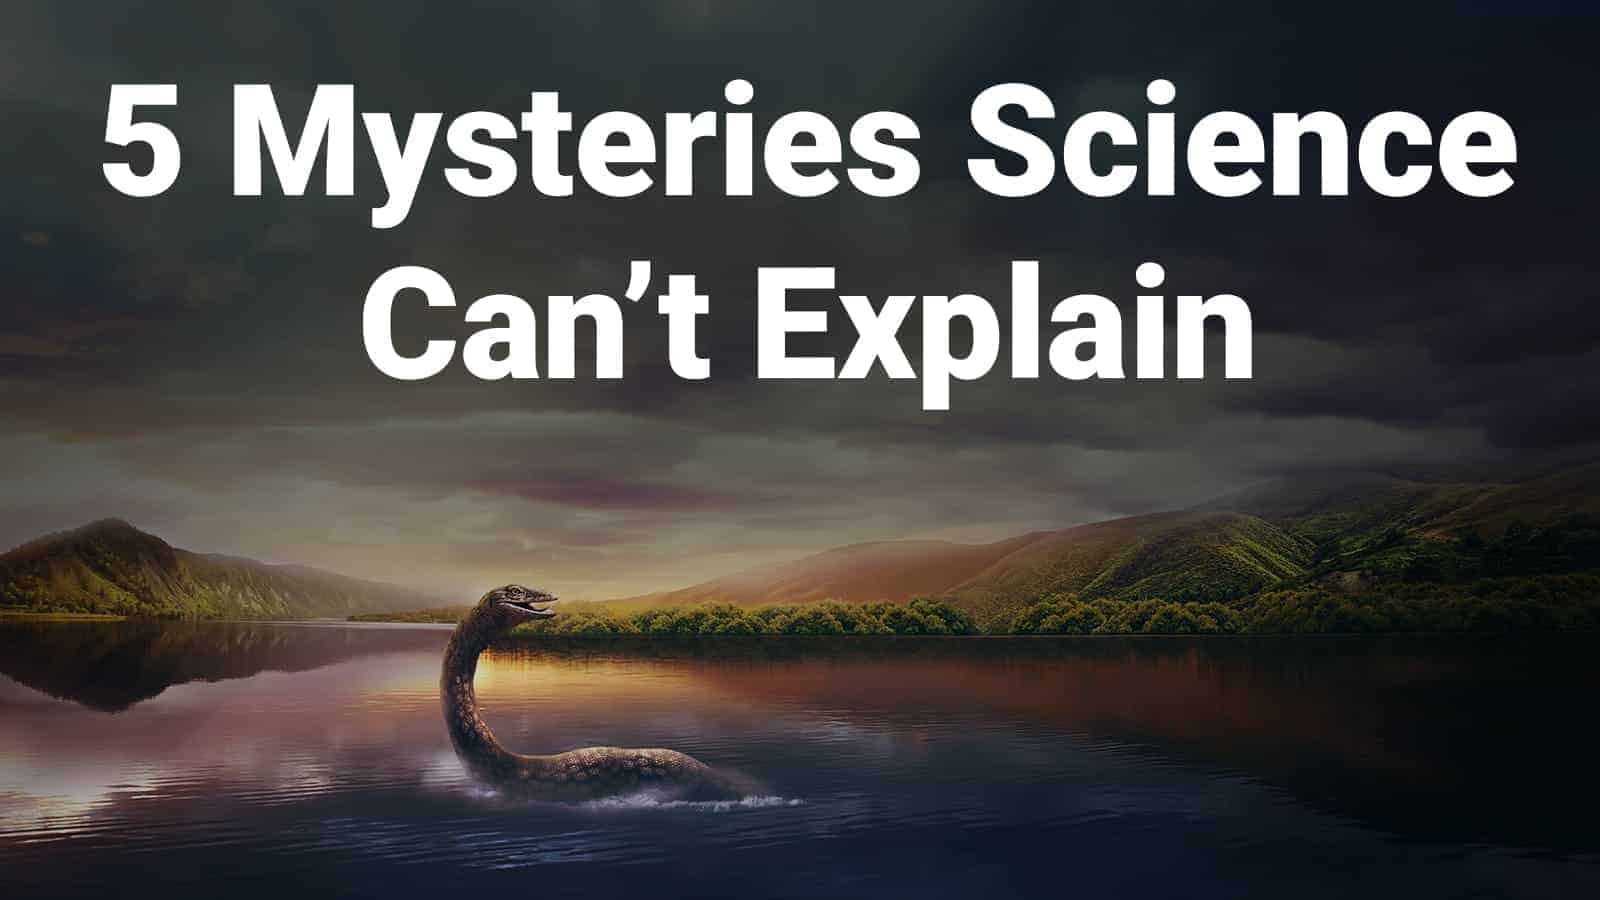 5 Mysteries Science Can’t Explain